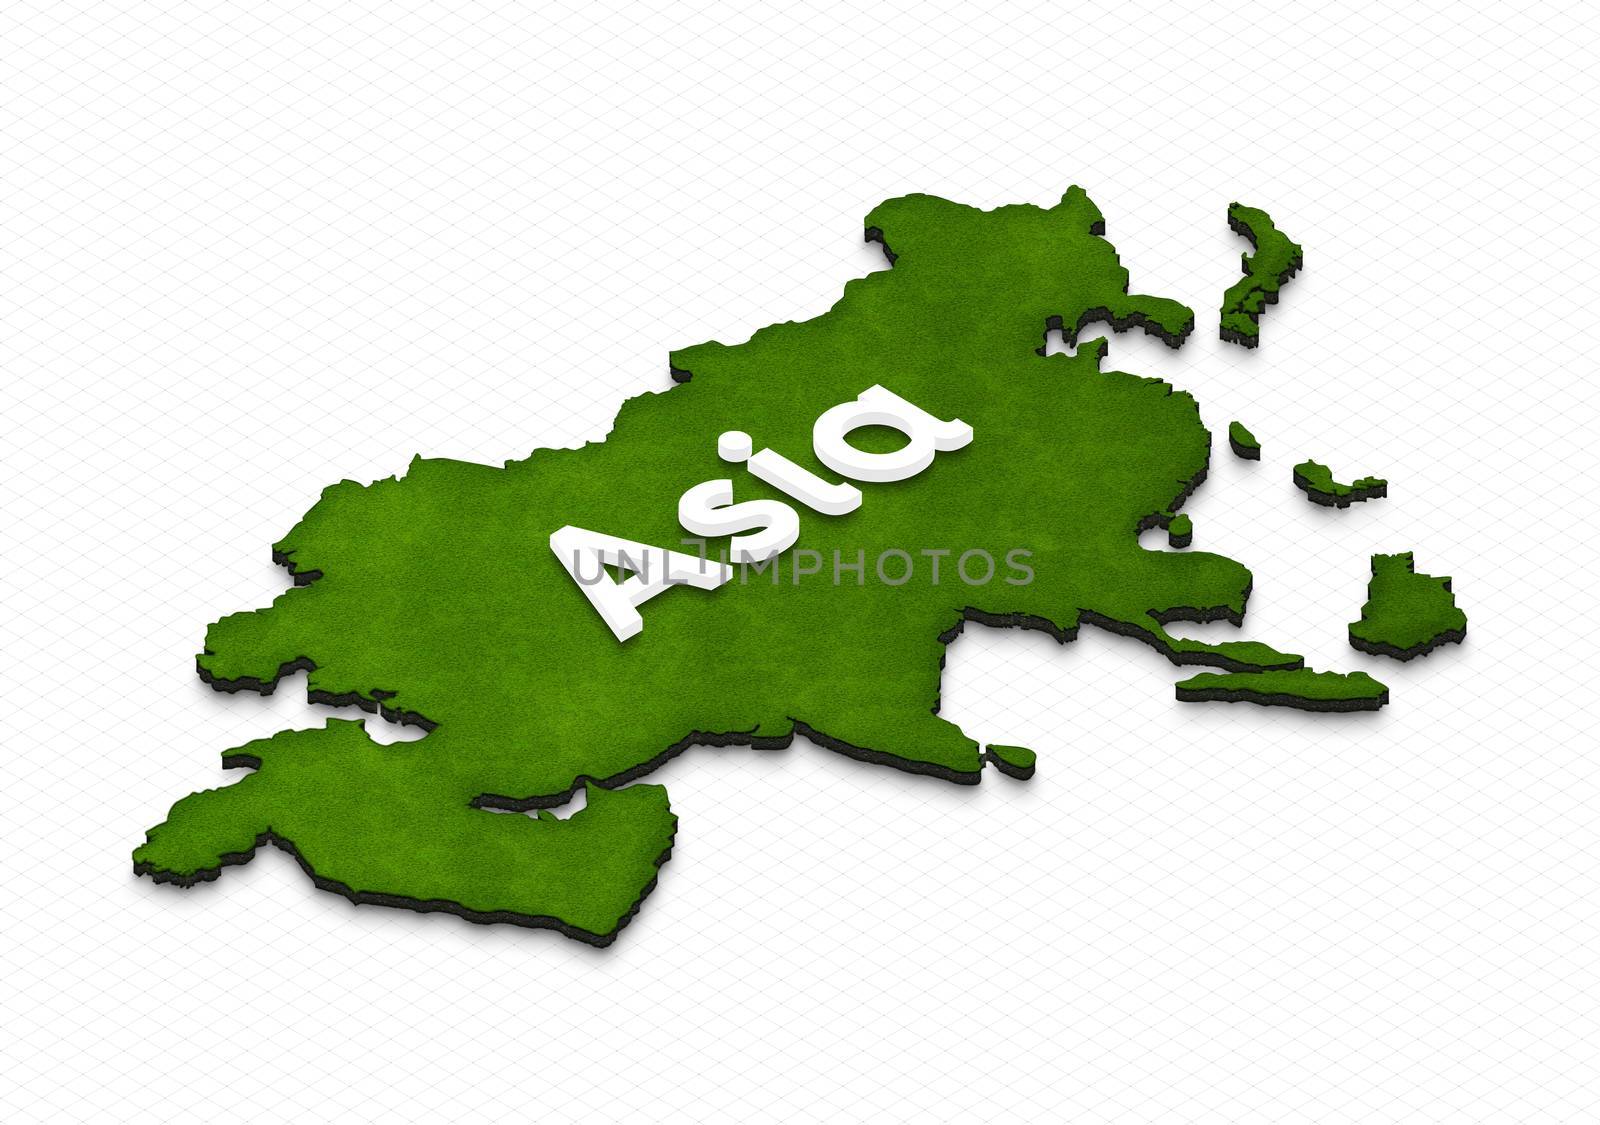 Map of Asia. 3D isometric illustration. by sanches812